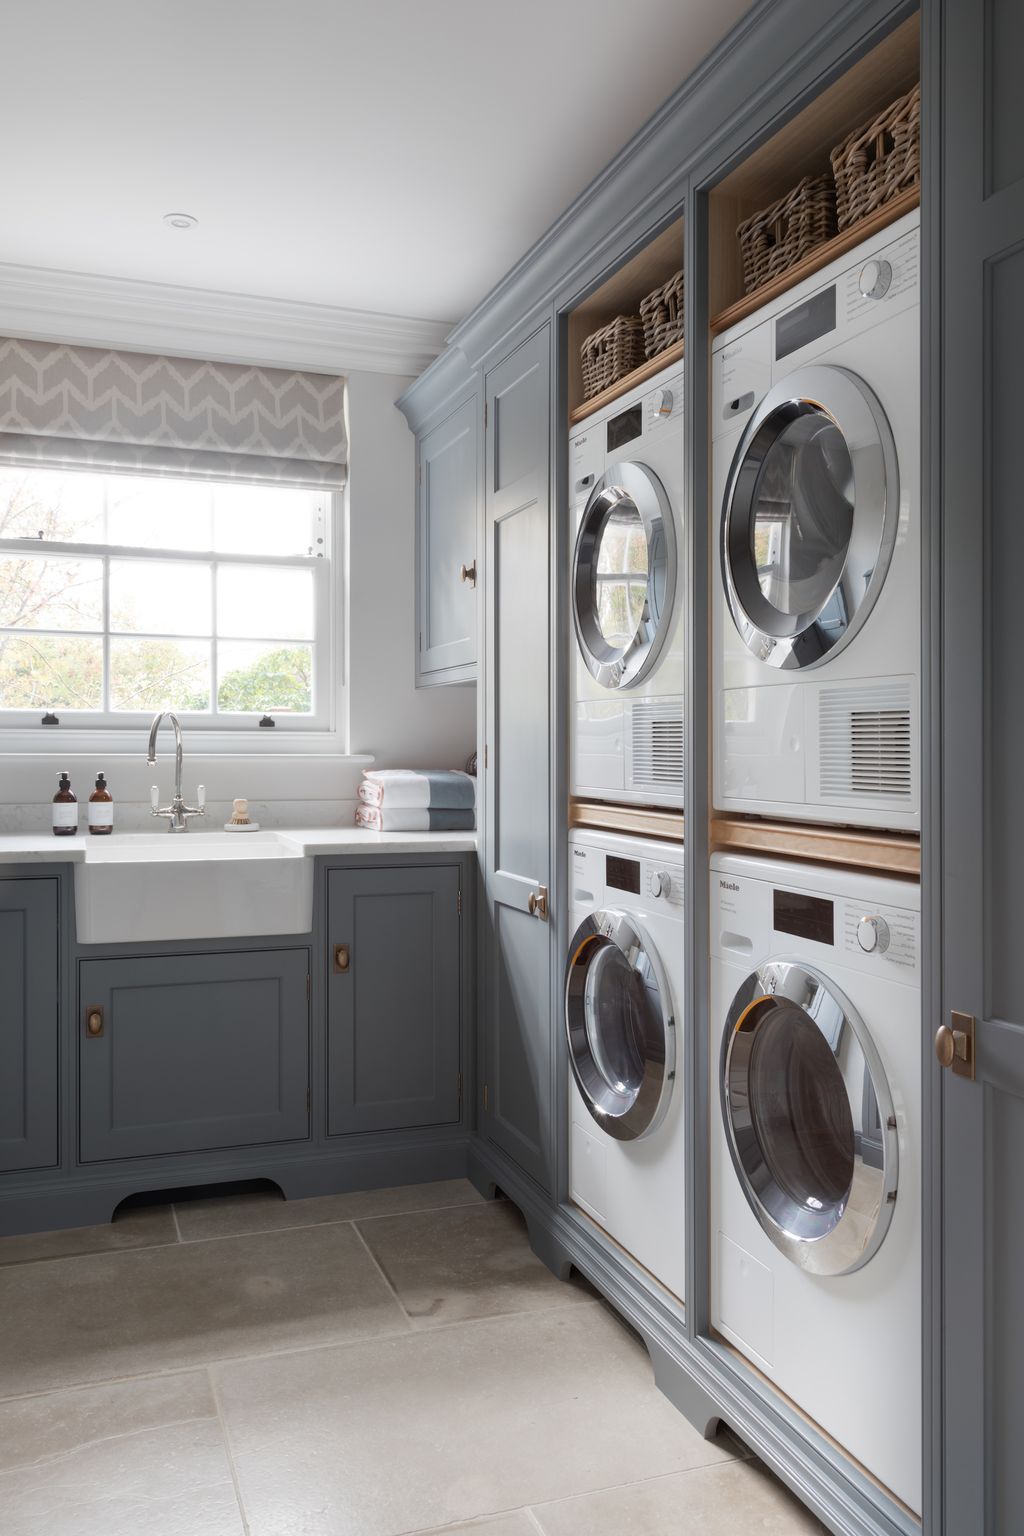 Utility Room at the Kent Project | Where Style Meets Functionality